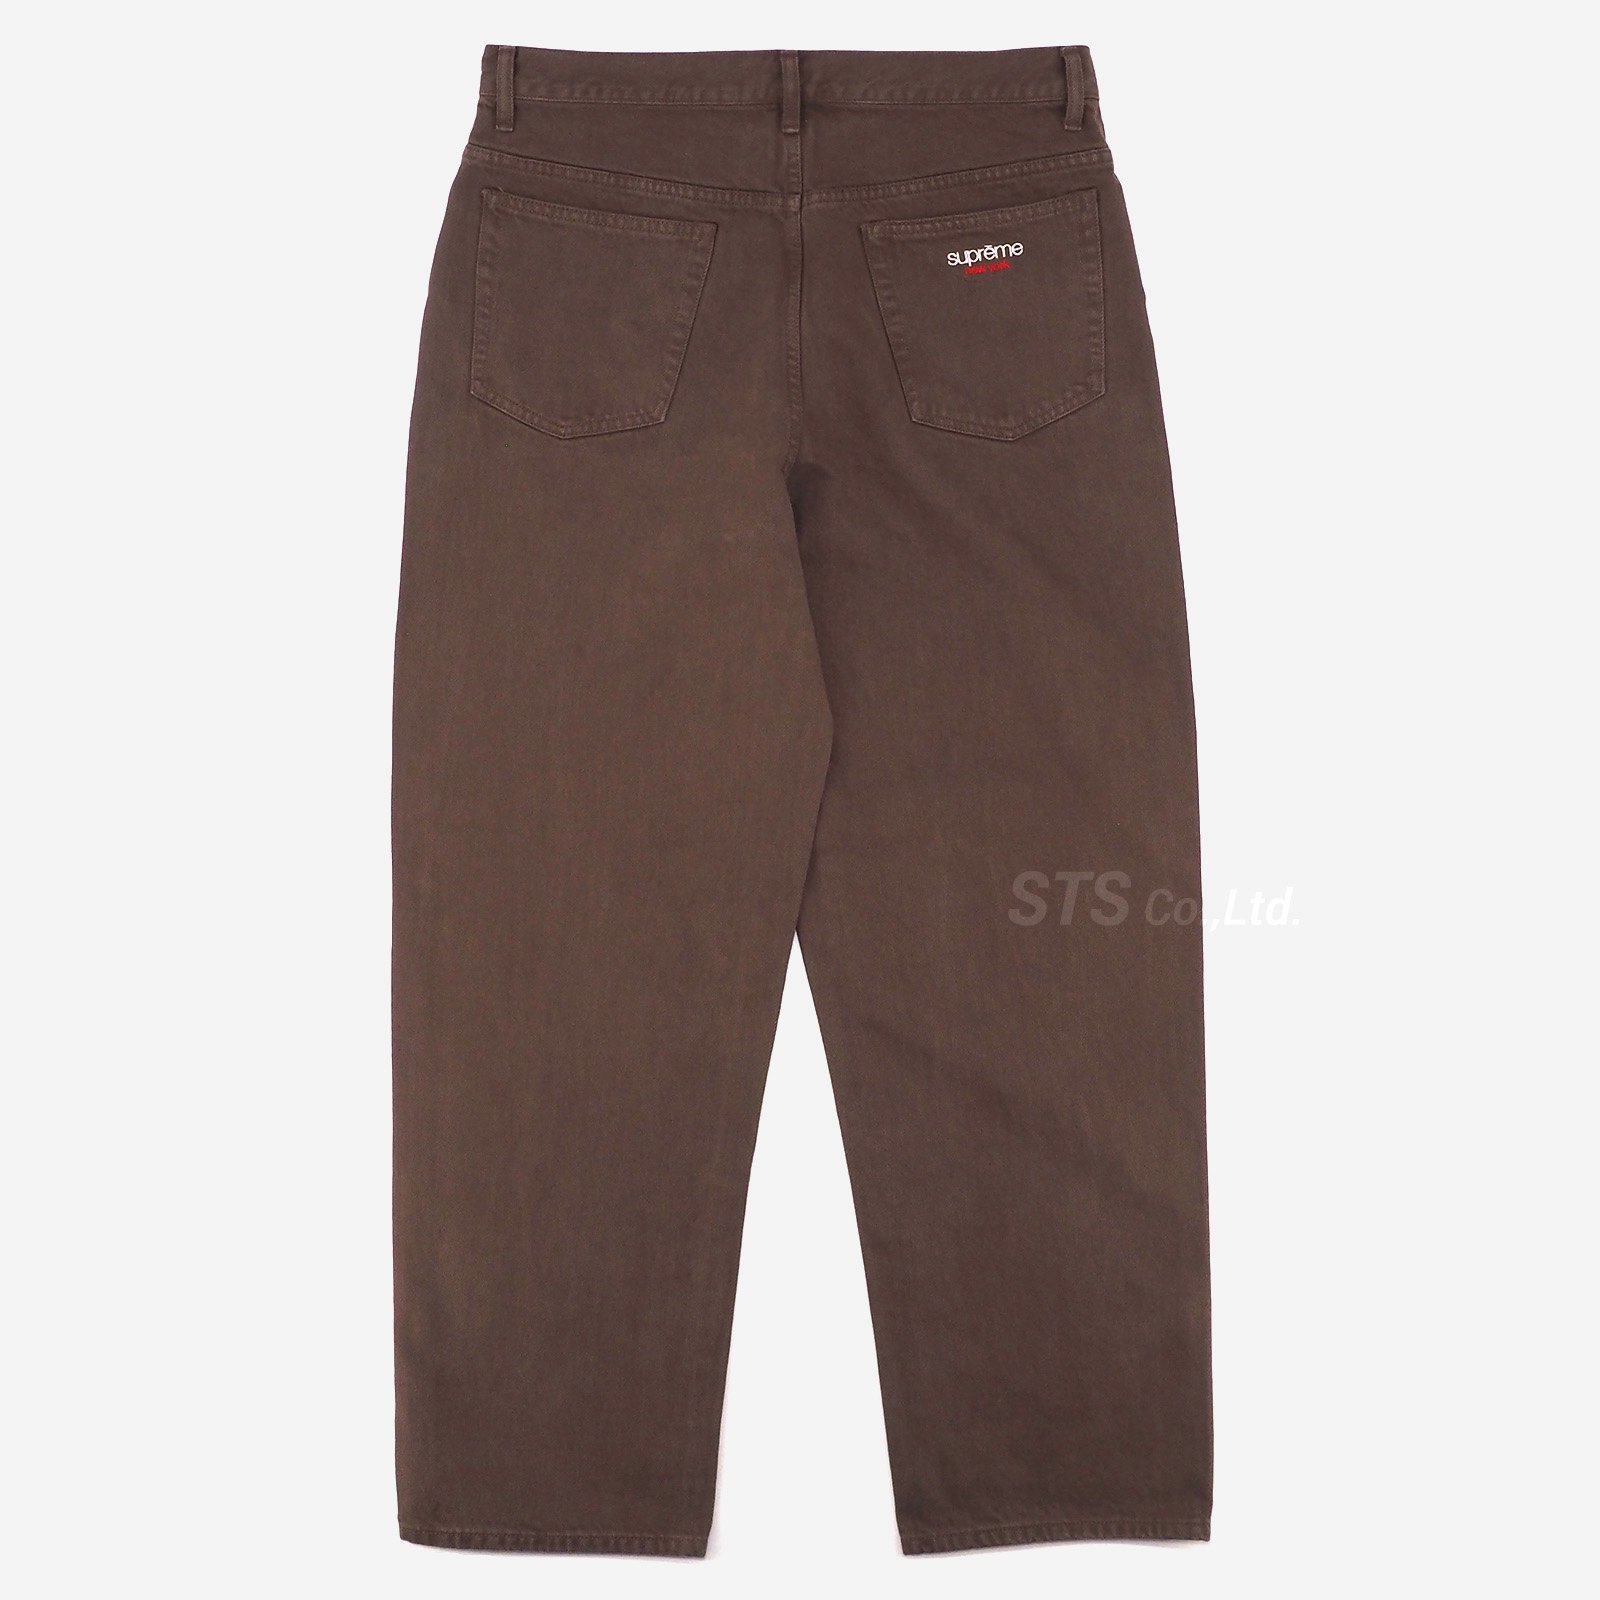 Supreme Baggy Jean "Green"その他